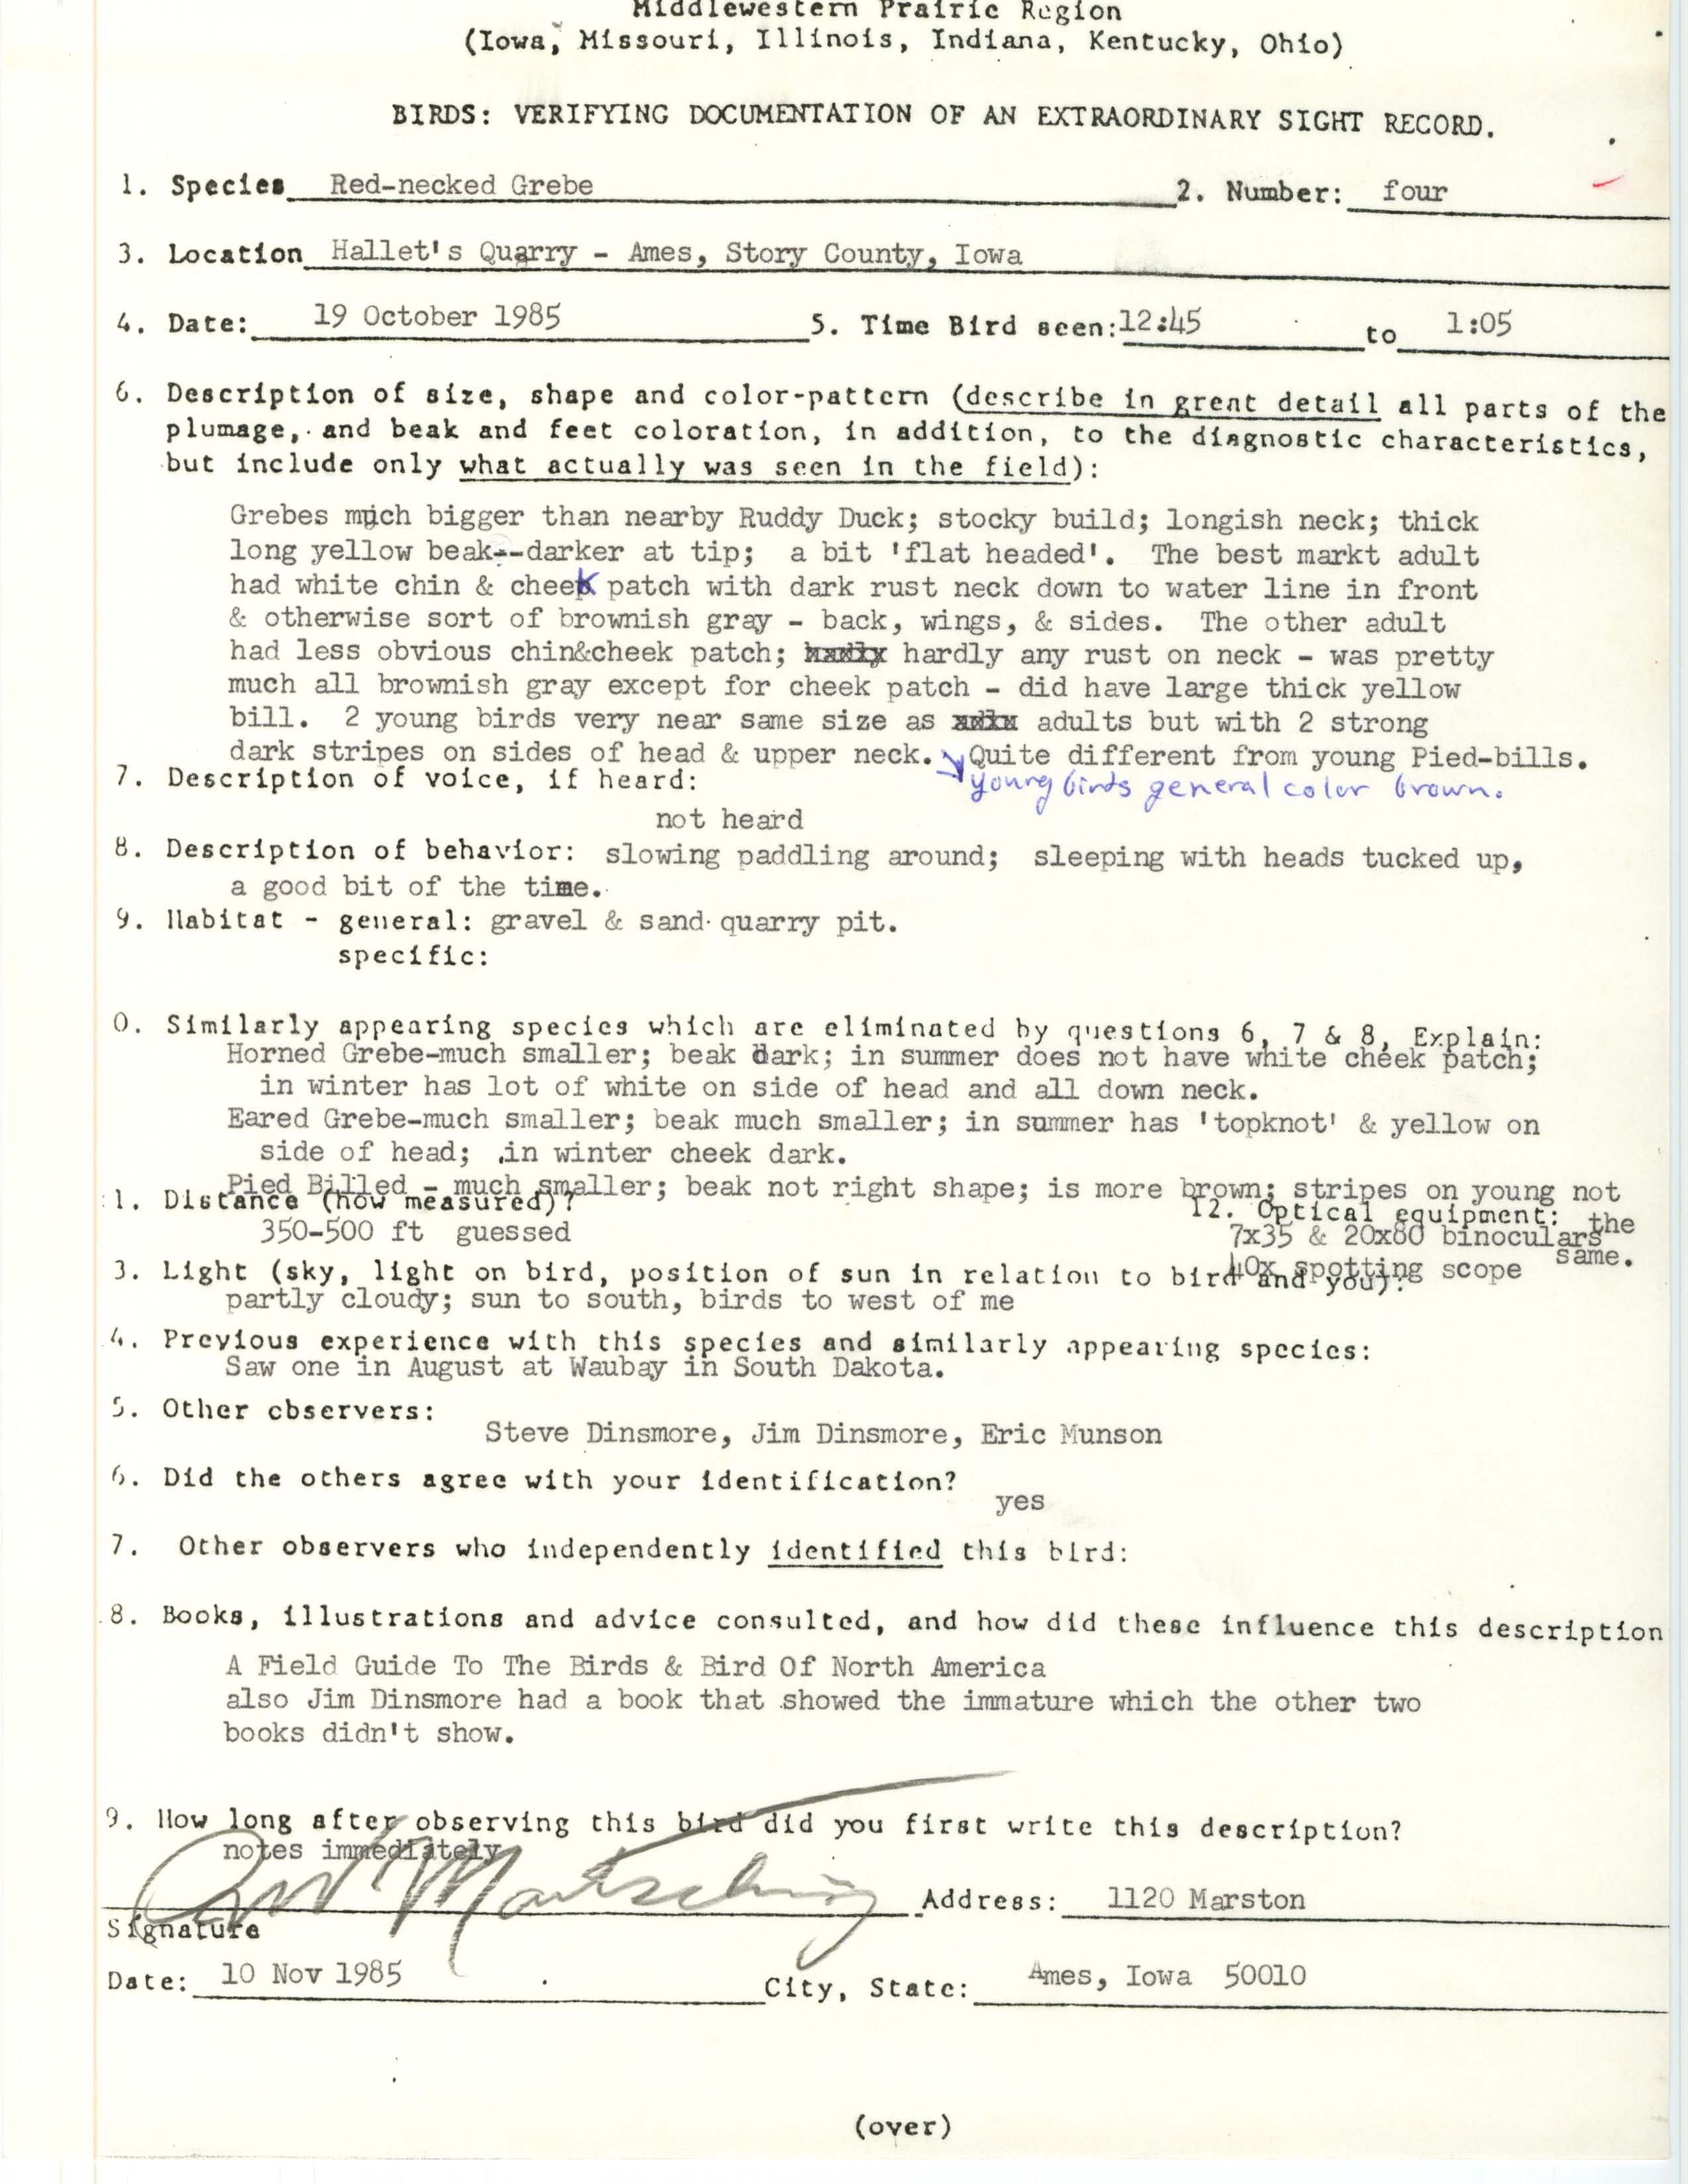 Rare bird documentation form for Red-necked Grebe at Hallett's Quarry in Ames, 1985